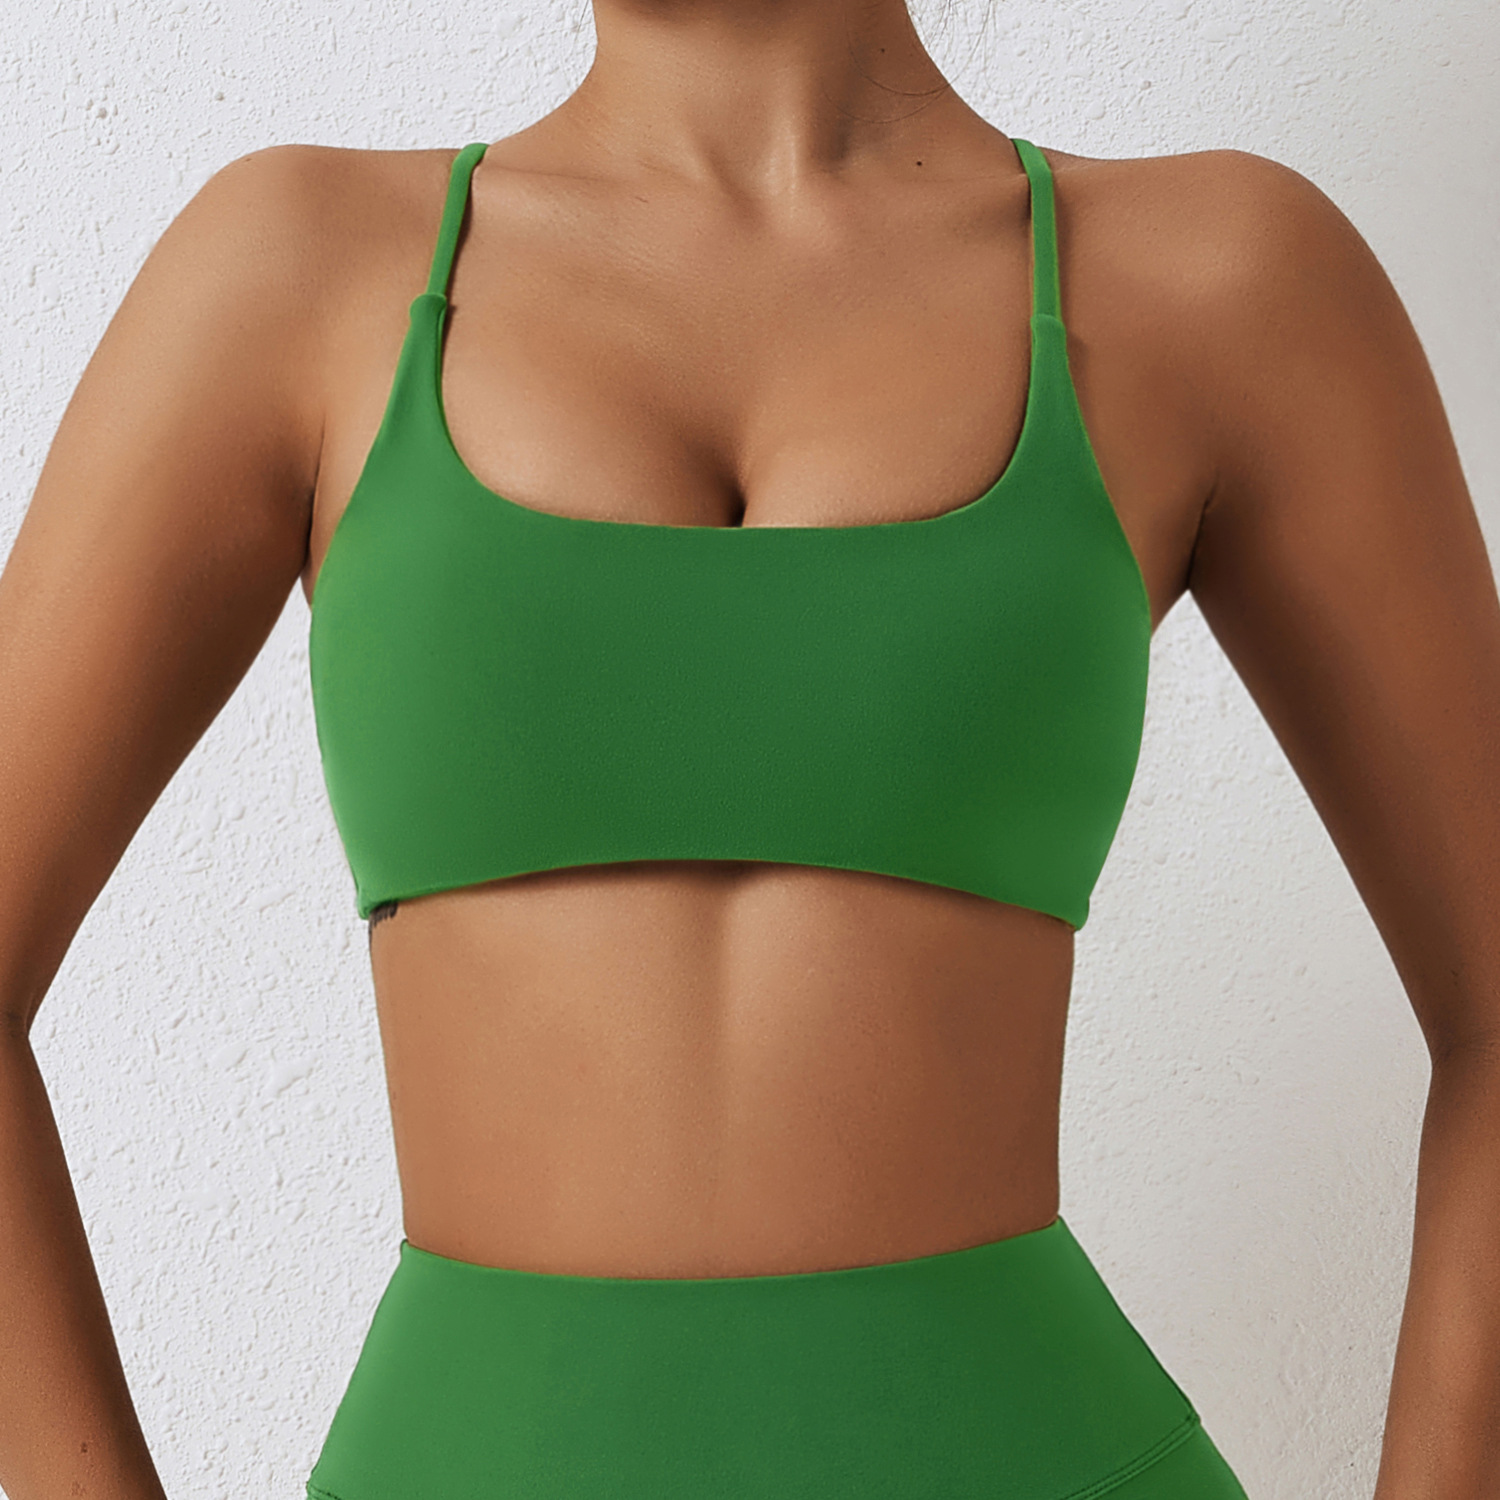 Womens Quick Dry Sports Bra Crisscross Back, Breathable, Skin Friendly  Fitness Tank Top In Various Colors From Victor_wong, $14.14